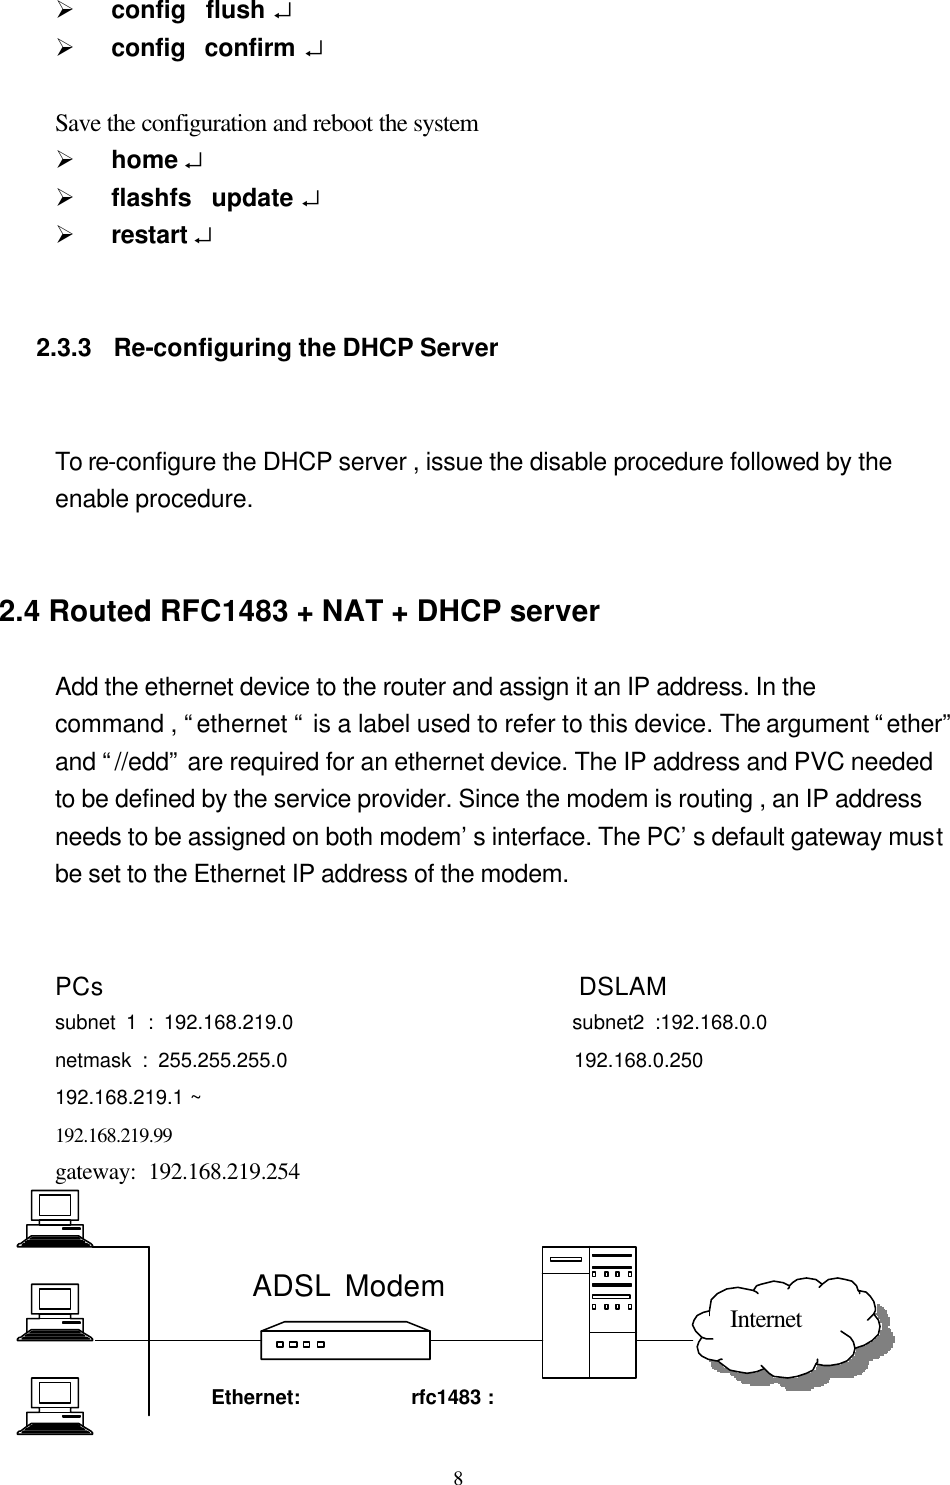  8Ø config  flush ↵   Ø config  confirm ↵    Save the configuration and reboot the system Ø home ↵   Ø flashfs  update ↵   Ø restart ↵         2.3.3  Re-configuring the DHCP Server                   To re-configure the DHCP server , issue the disable procedure followed by the   enable procedure.     2.4 Routed RFC1483 + NAT + DHCP server          Add the ethernet device to the router and assign it an IP address. In the command , “ethernet “ is a label used to refer to this device. The argument “ether” and “//edd” are required for an ethernet device. The IP address and PVC needed to be defined by the service provider. Since the modem is routing , an IP address needs to be assigned on both modem’s interface. The PC’s default gateway must be set to the Ethernet IP address of the modem.     PCs                                      DSLAM subnet 1 : 192.168.219.0                           subnet2 :192.168.0.0 netmask : 255.255.255.0                           192.168.0.250 192.168.219.1 ~ 192.168.219.99      gateway: 192.168.219.254                                                                    ADSL Modem         Ethernet:   rfc1483 : Internet 